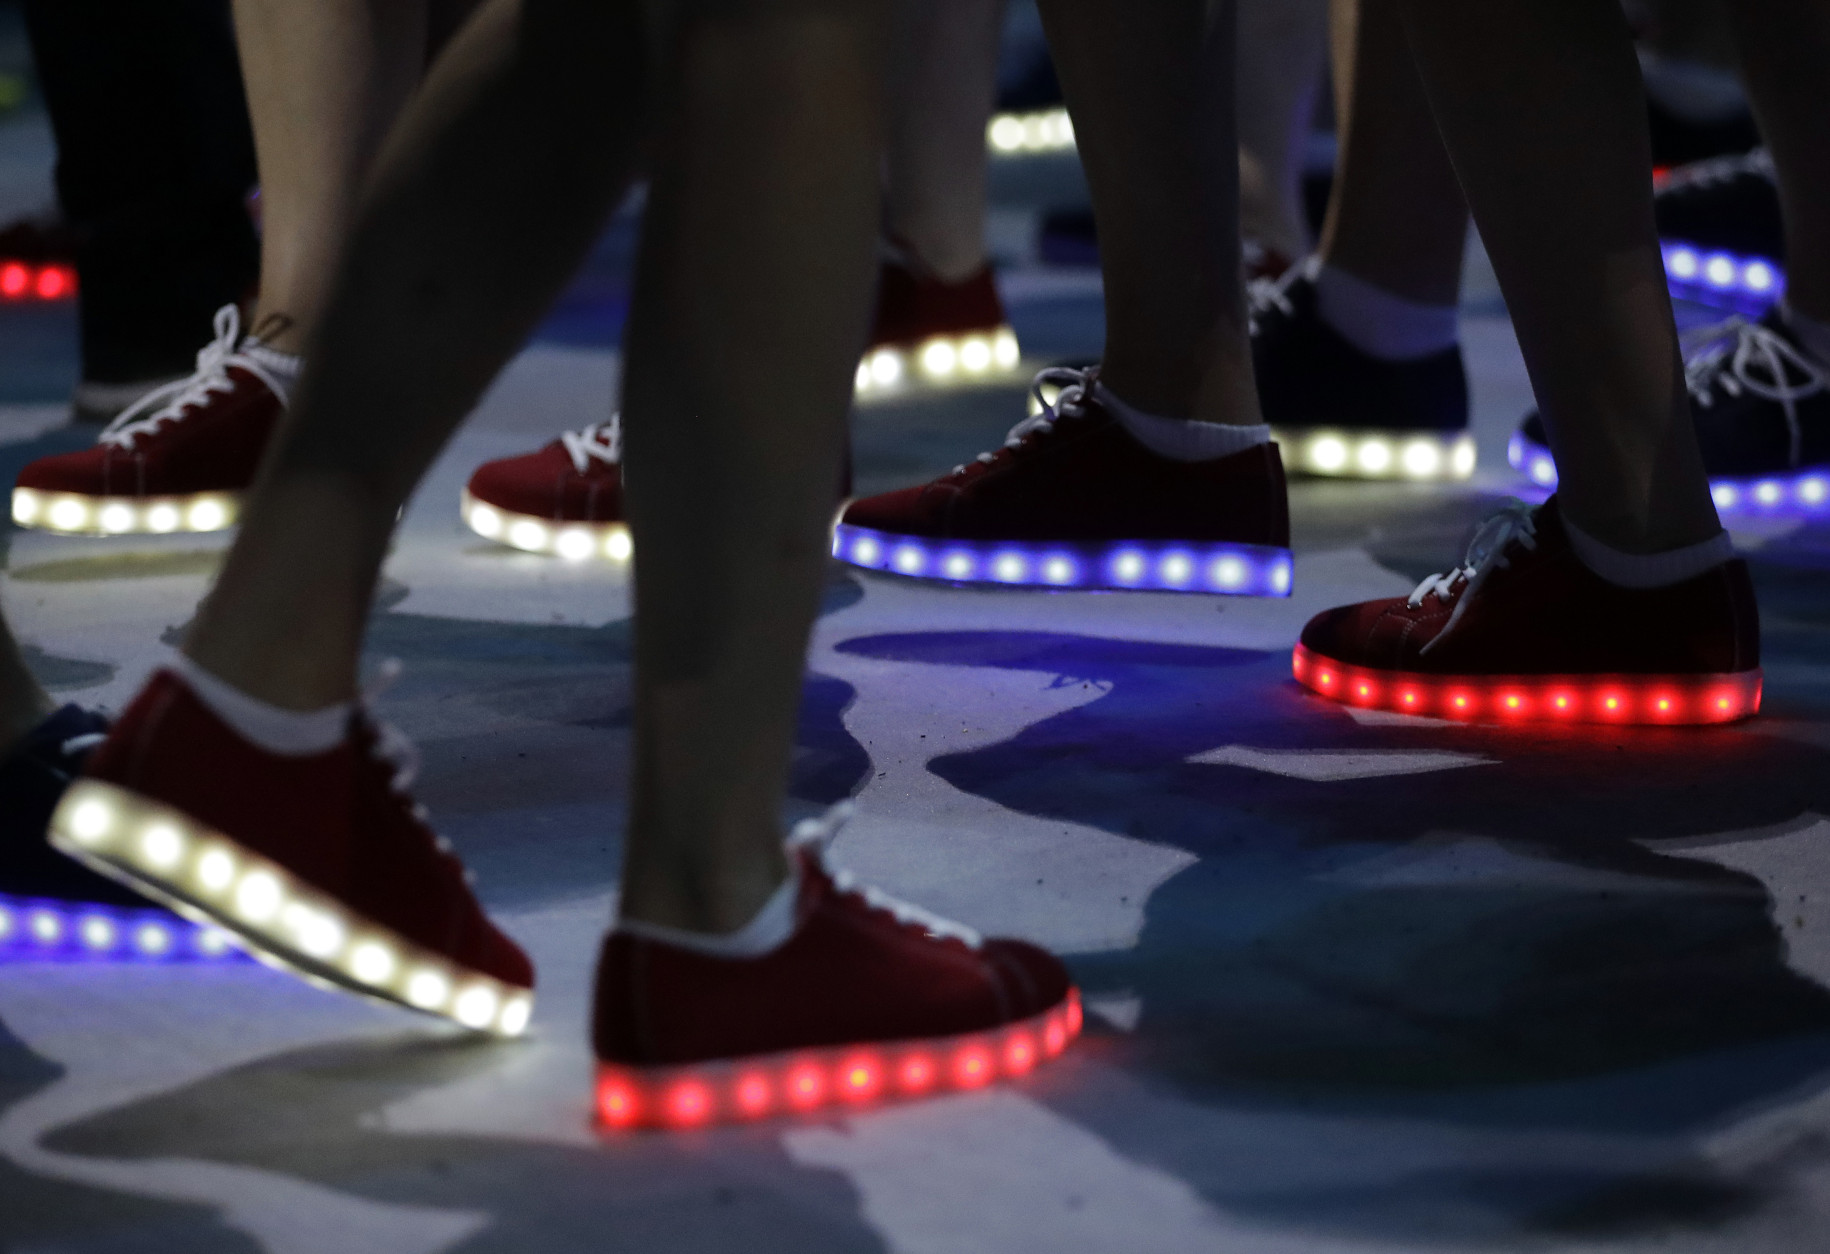 British athletes wear glooming shoes during the closing ceremony in the Maracana stadium at the 2016 Summer Olympics in Rio de Janeiro, Brazil, Sunday, Aug. 21, 2016. (AP Photo/David Goldman)